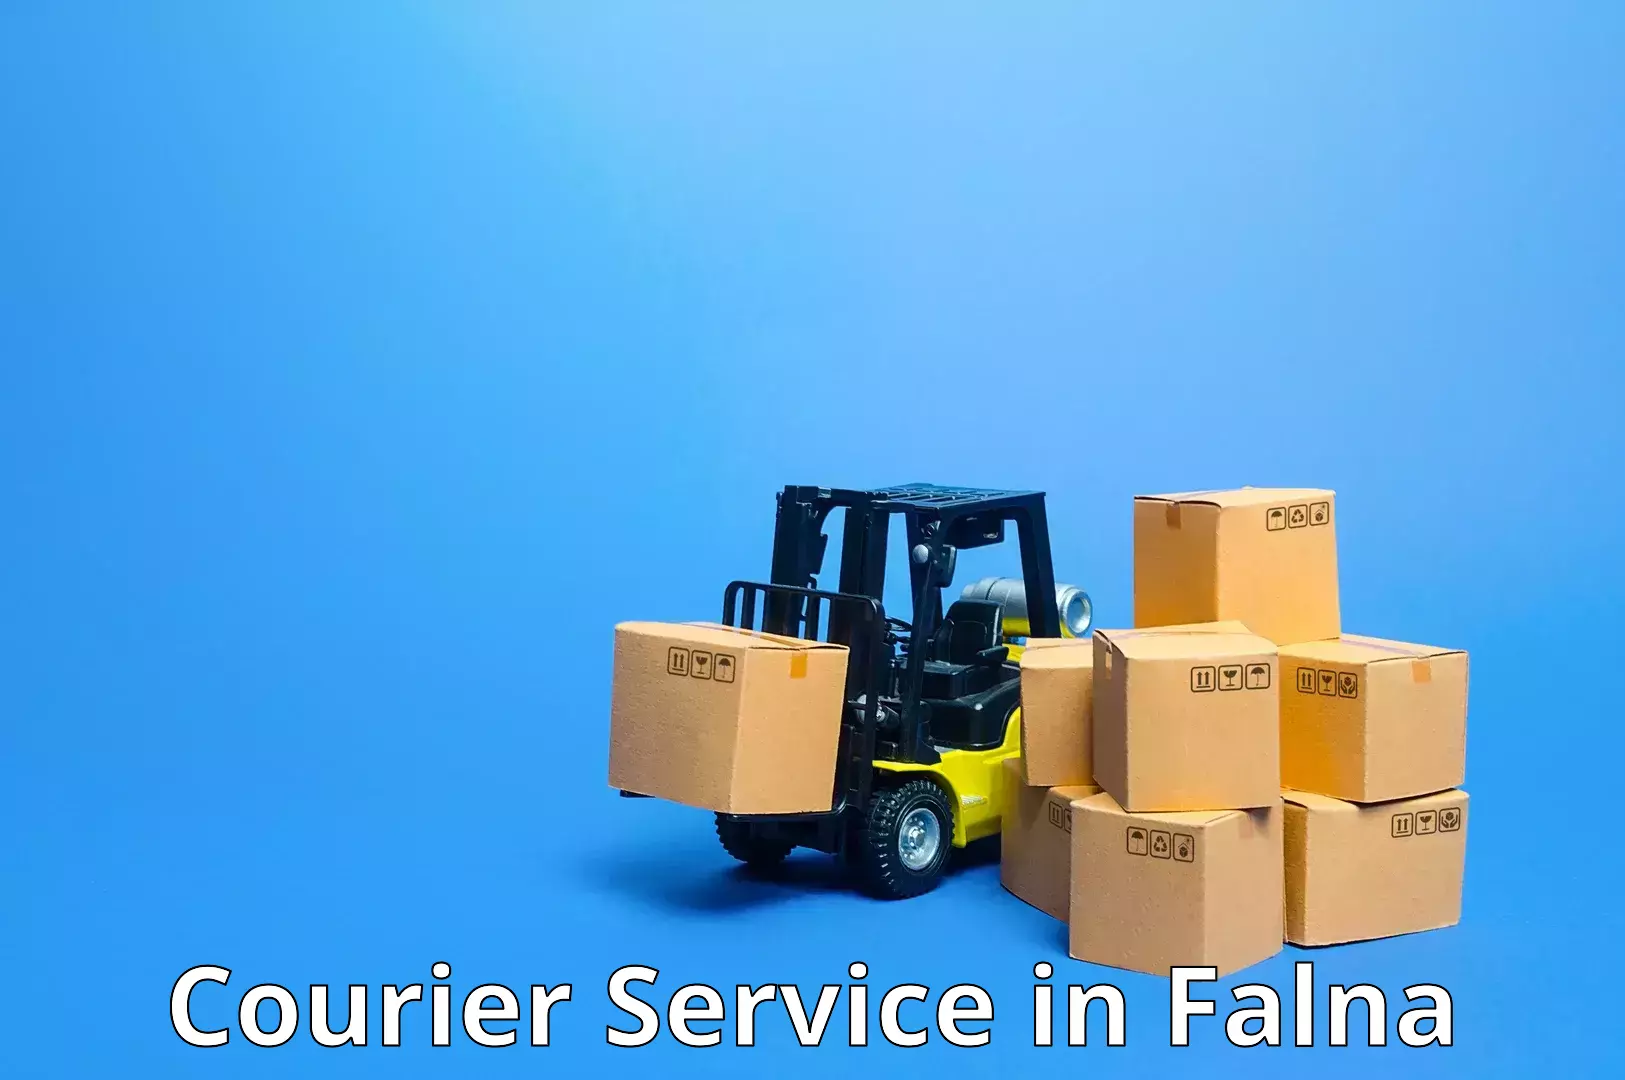 24-hour courier service in Falna